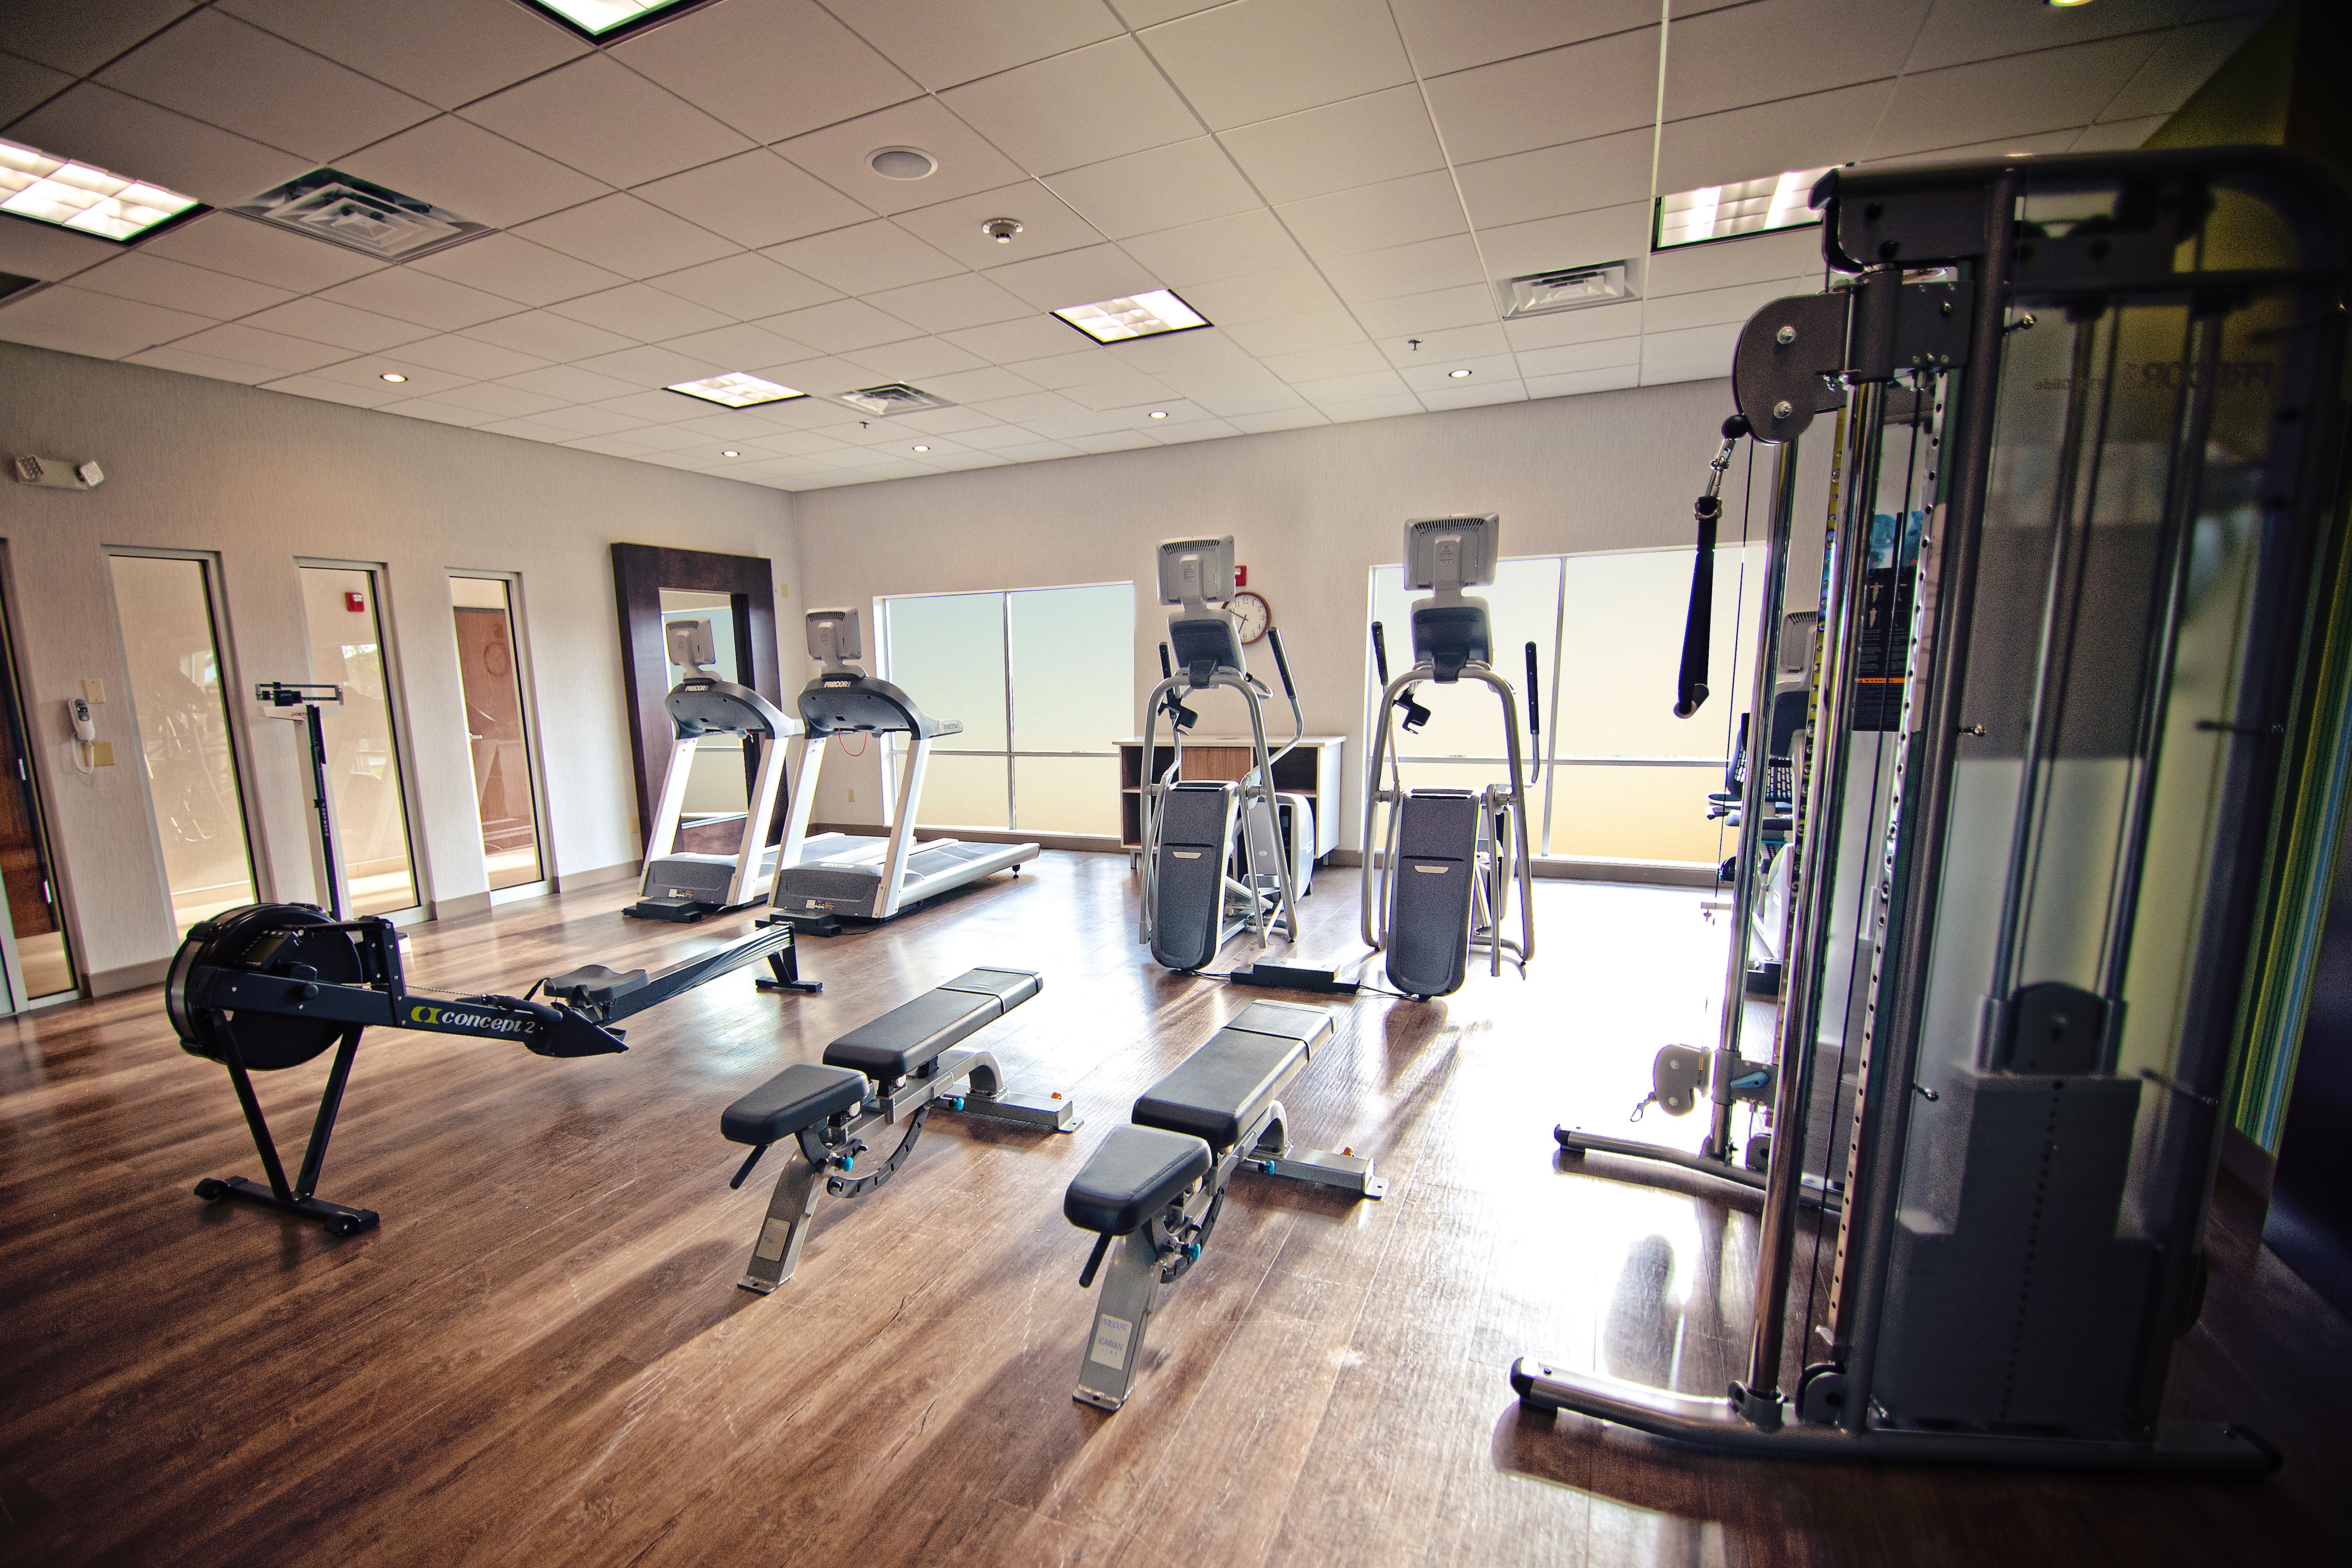 Fitness Center within jogging distance to Fireman's Park